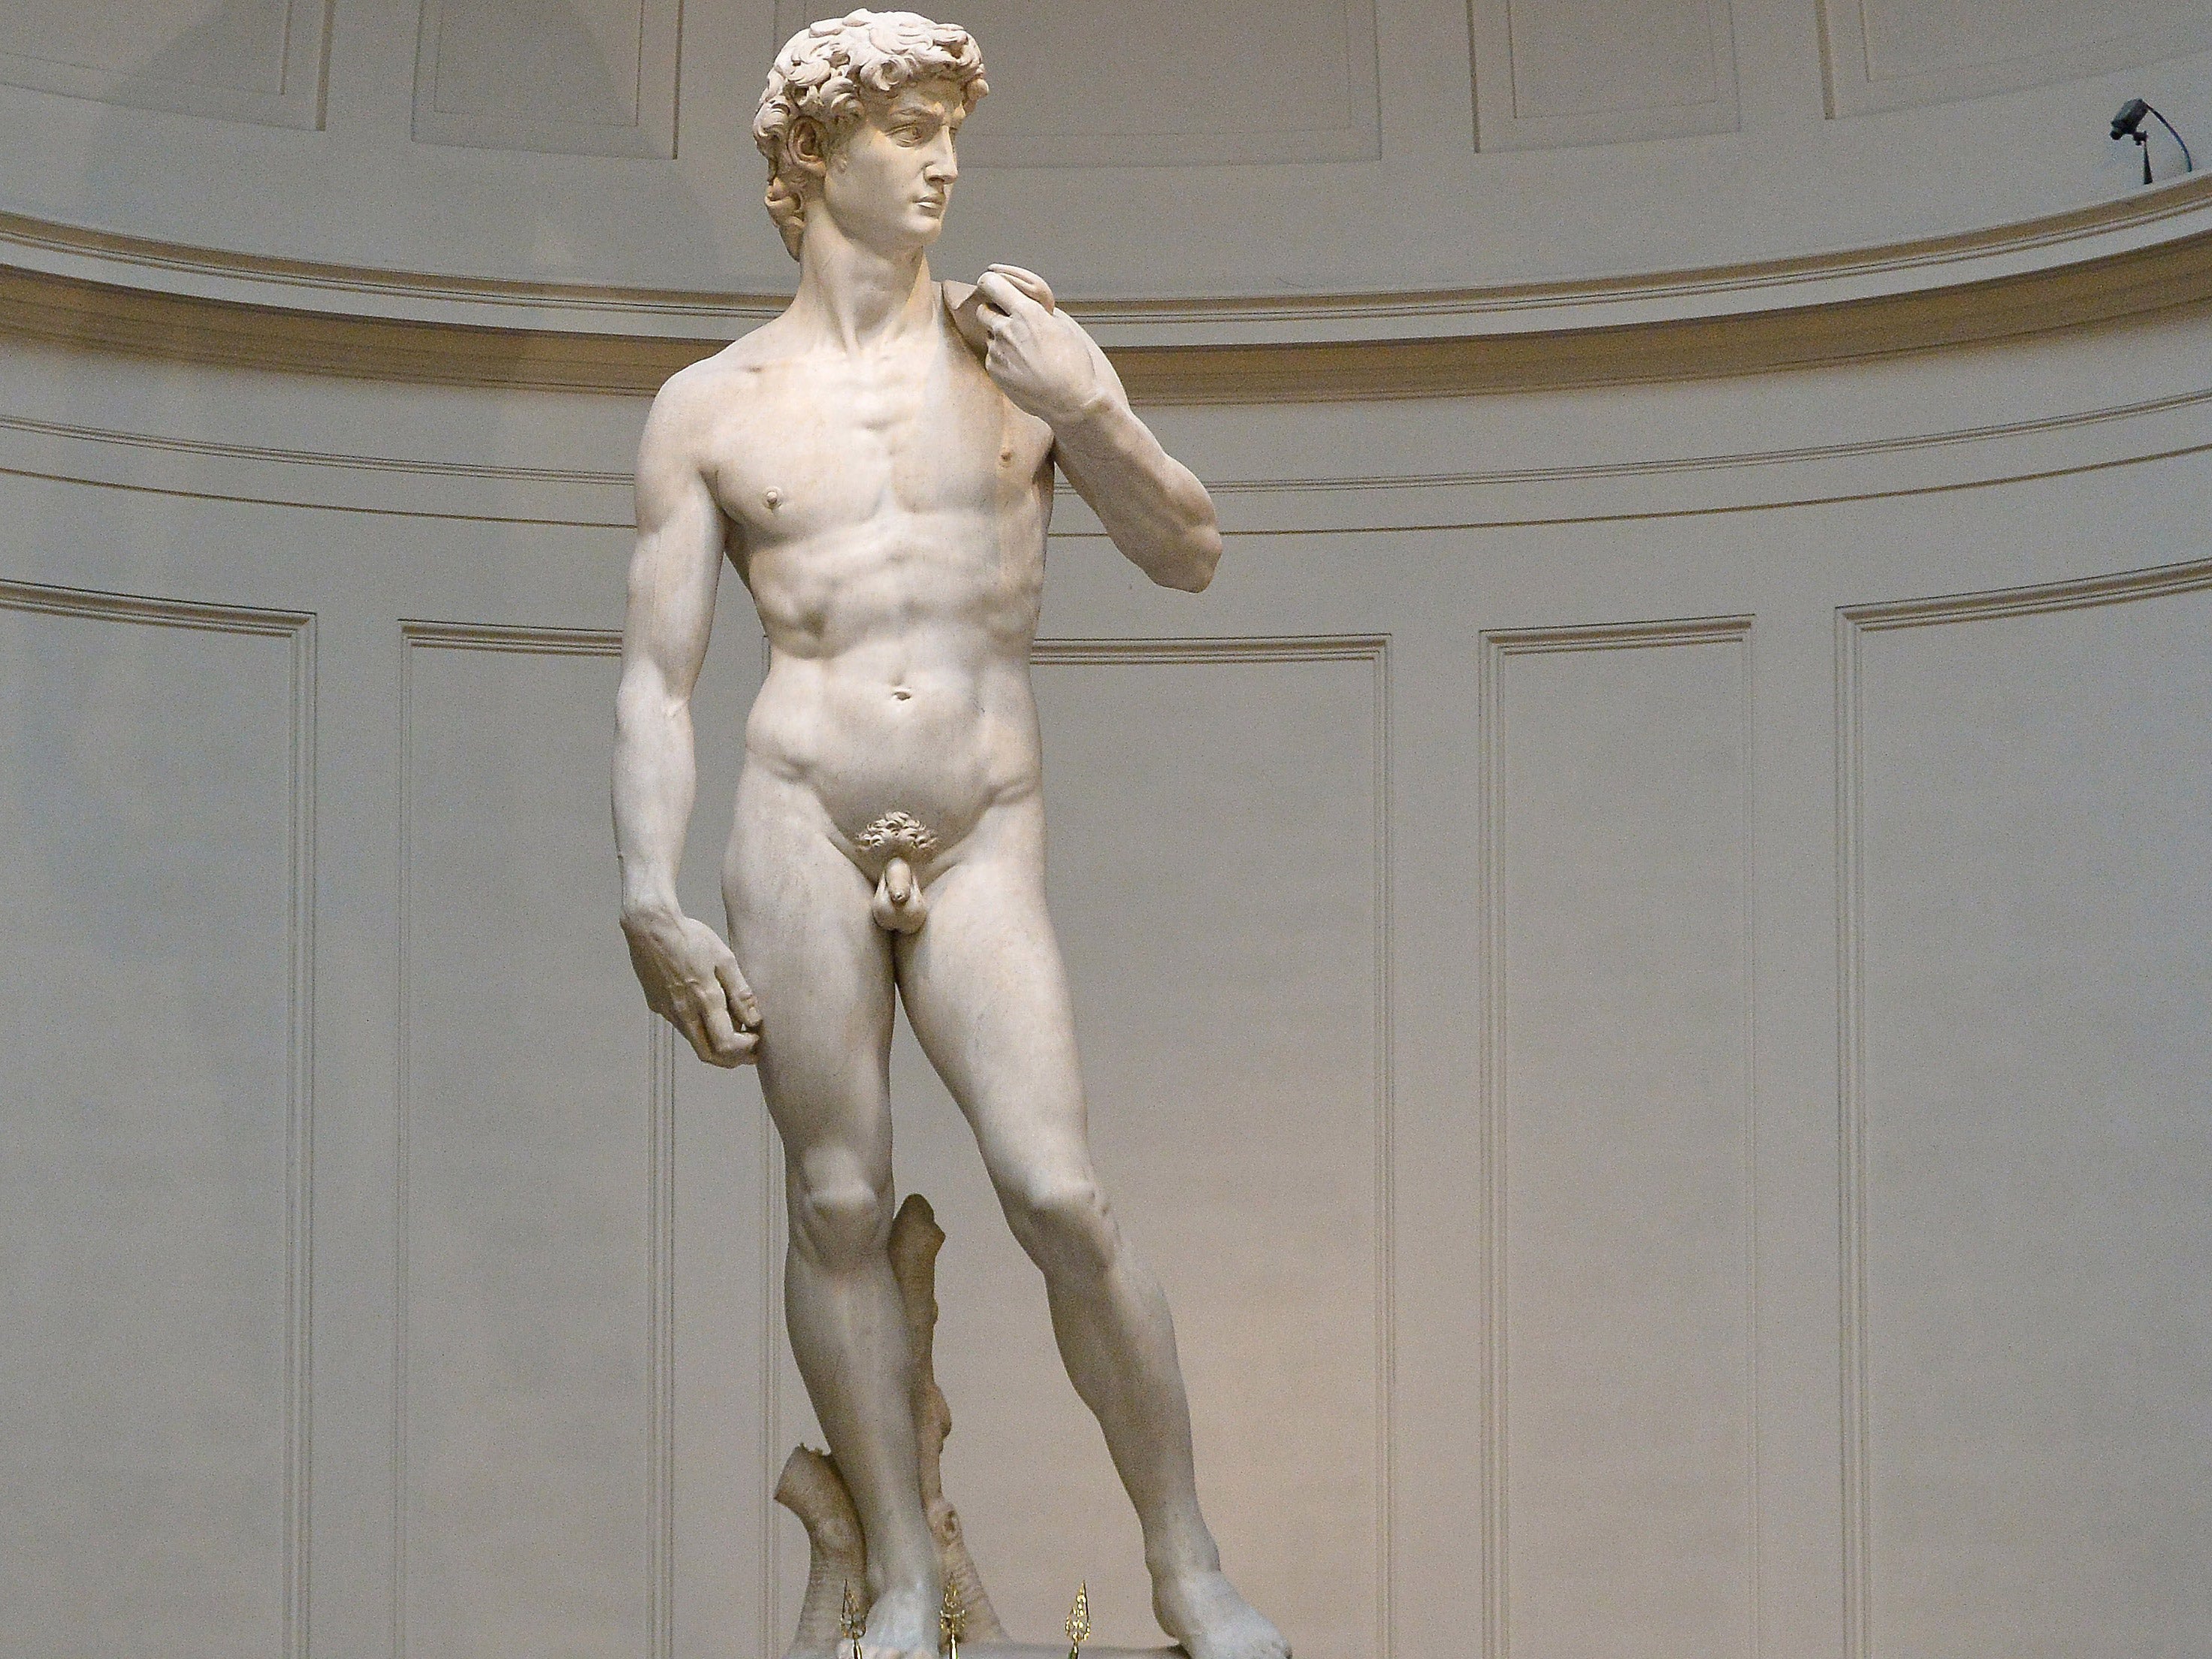 This is the statue of David